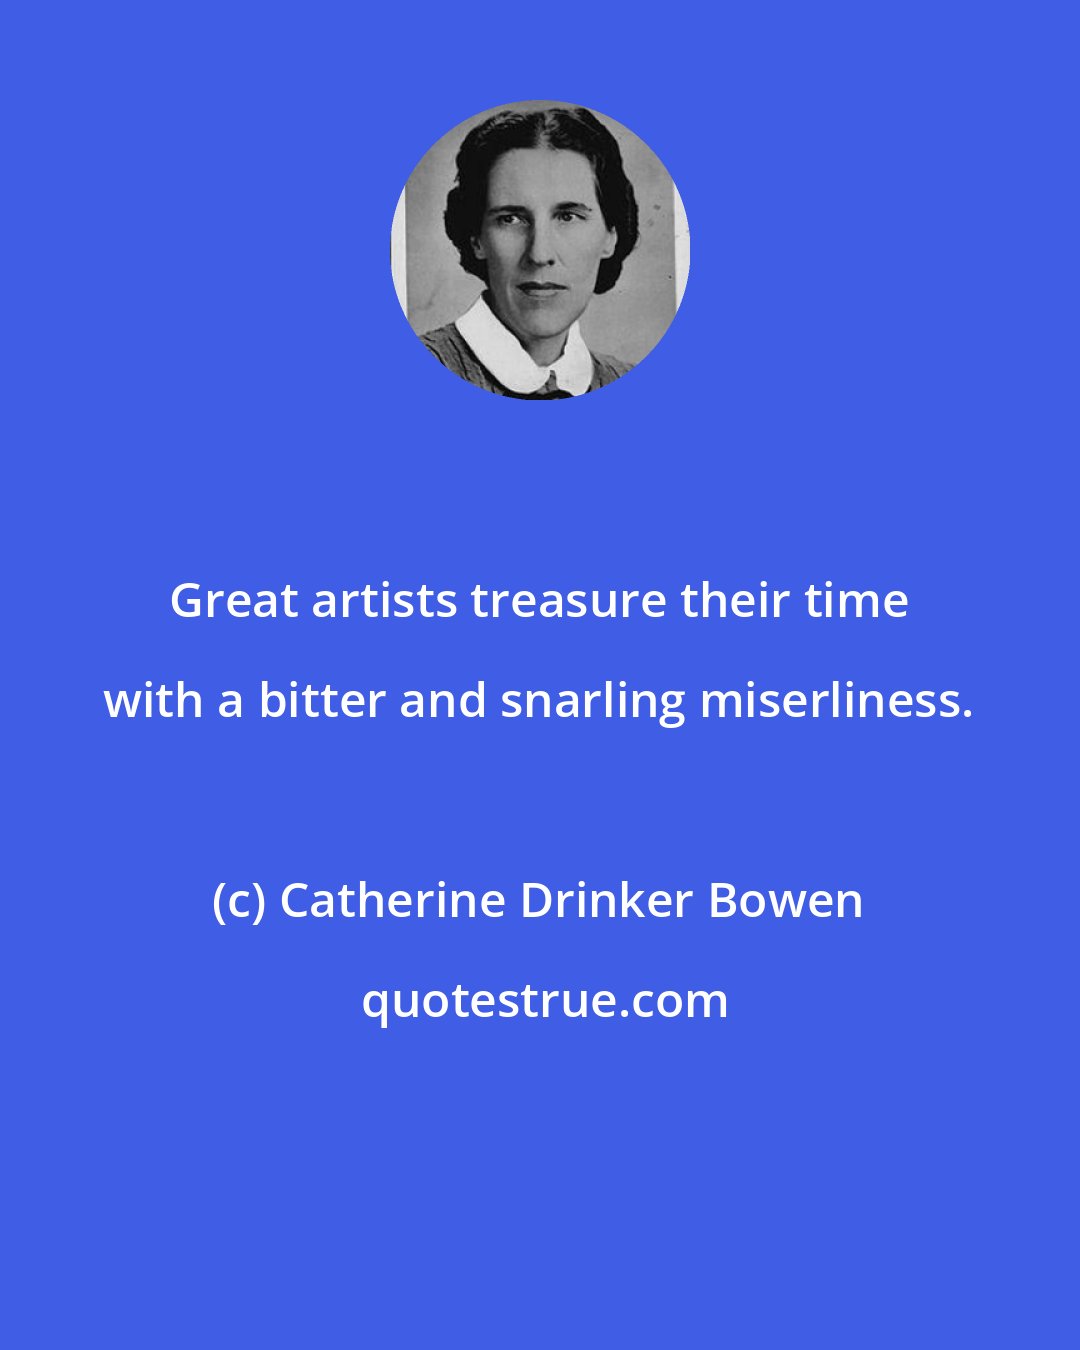 Catherine Drinker Bowen: Great artists treasure their time with a bitter and snarling miserliness.